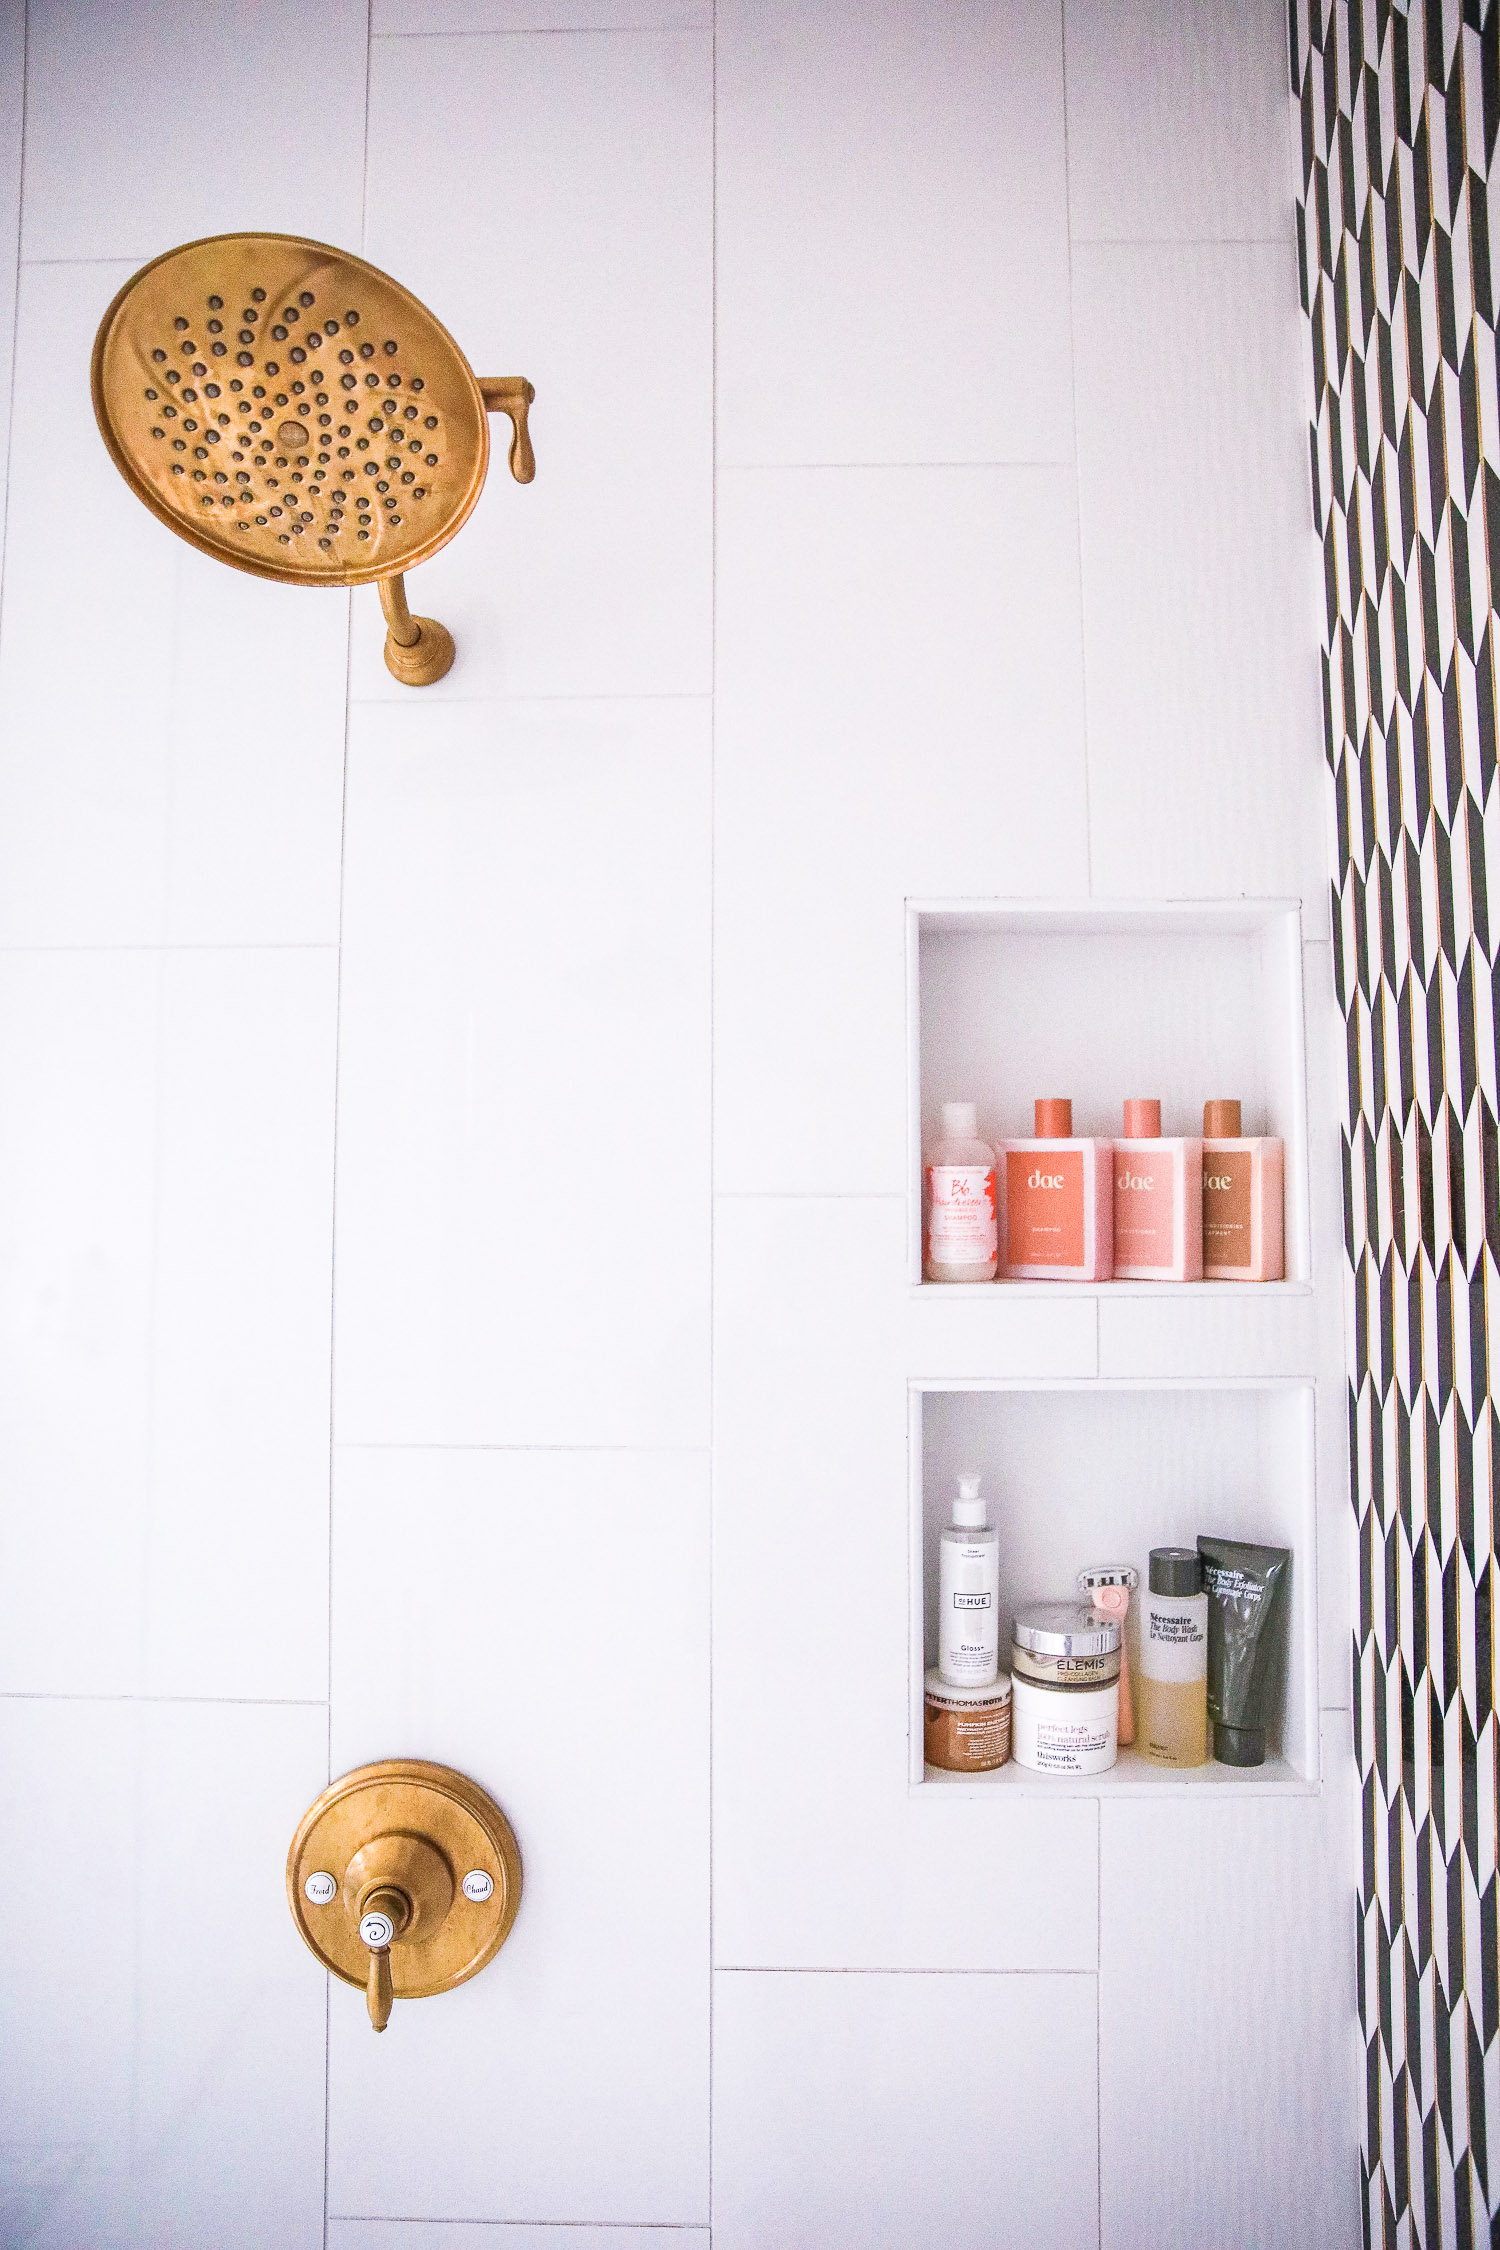 dae shampoo and conditioner | Nighttime Routine by popular US beauty blog, The Sweetest Thing: image of a bathroom shower with a gold shower head, and Dae shampoo, Dae conditioner, and Dae deep conditioner. 